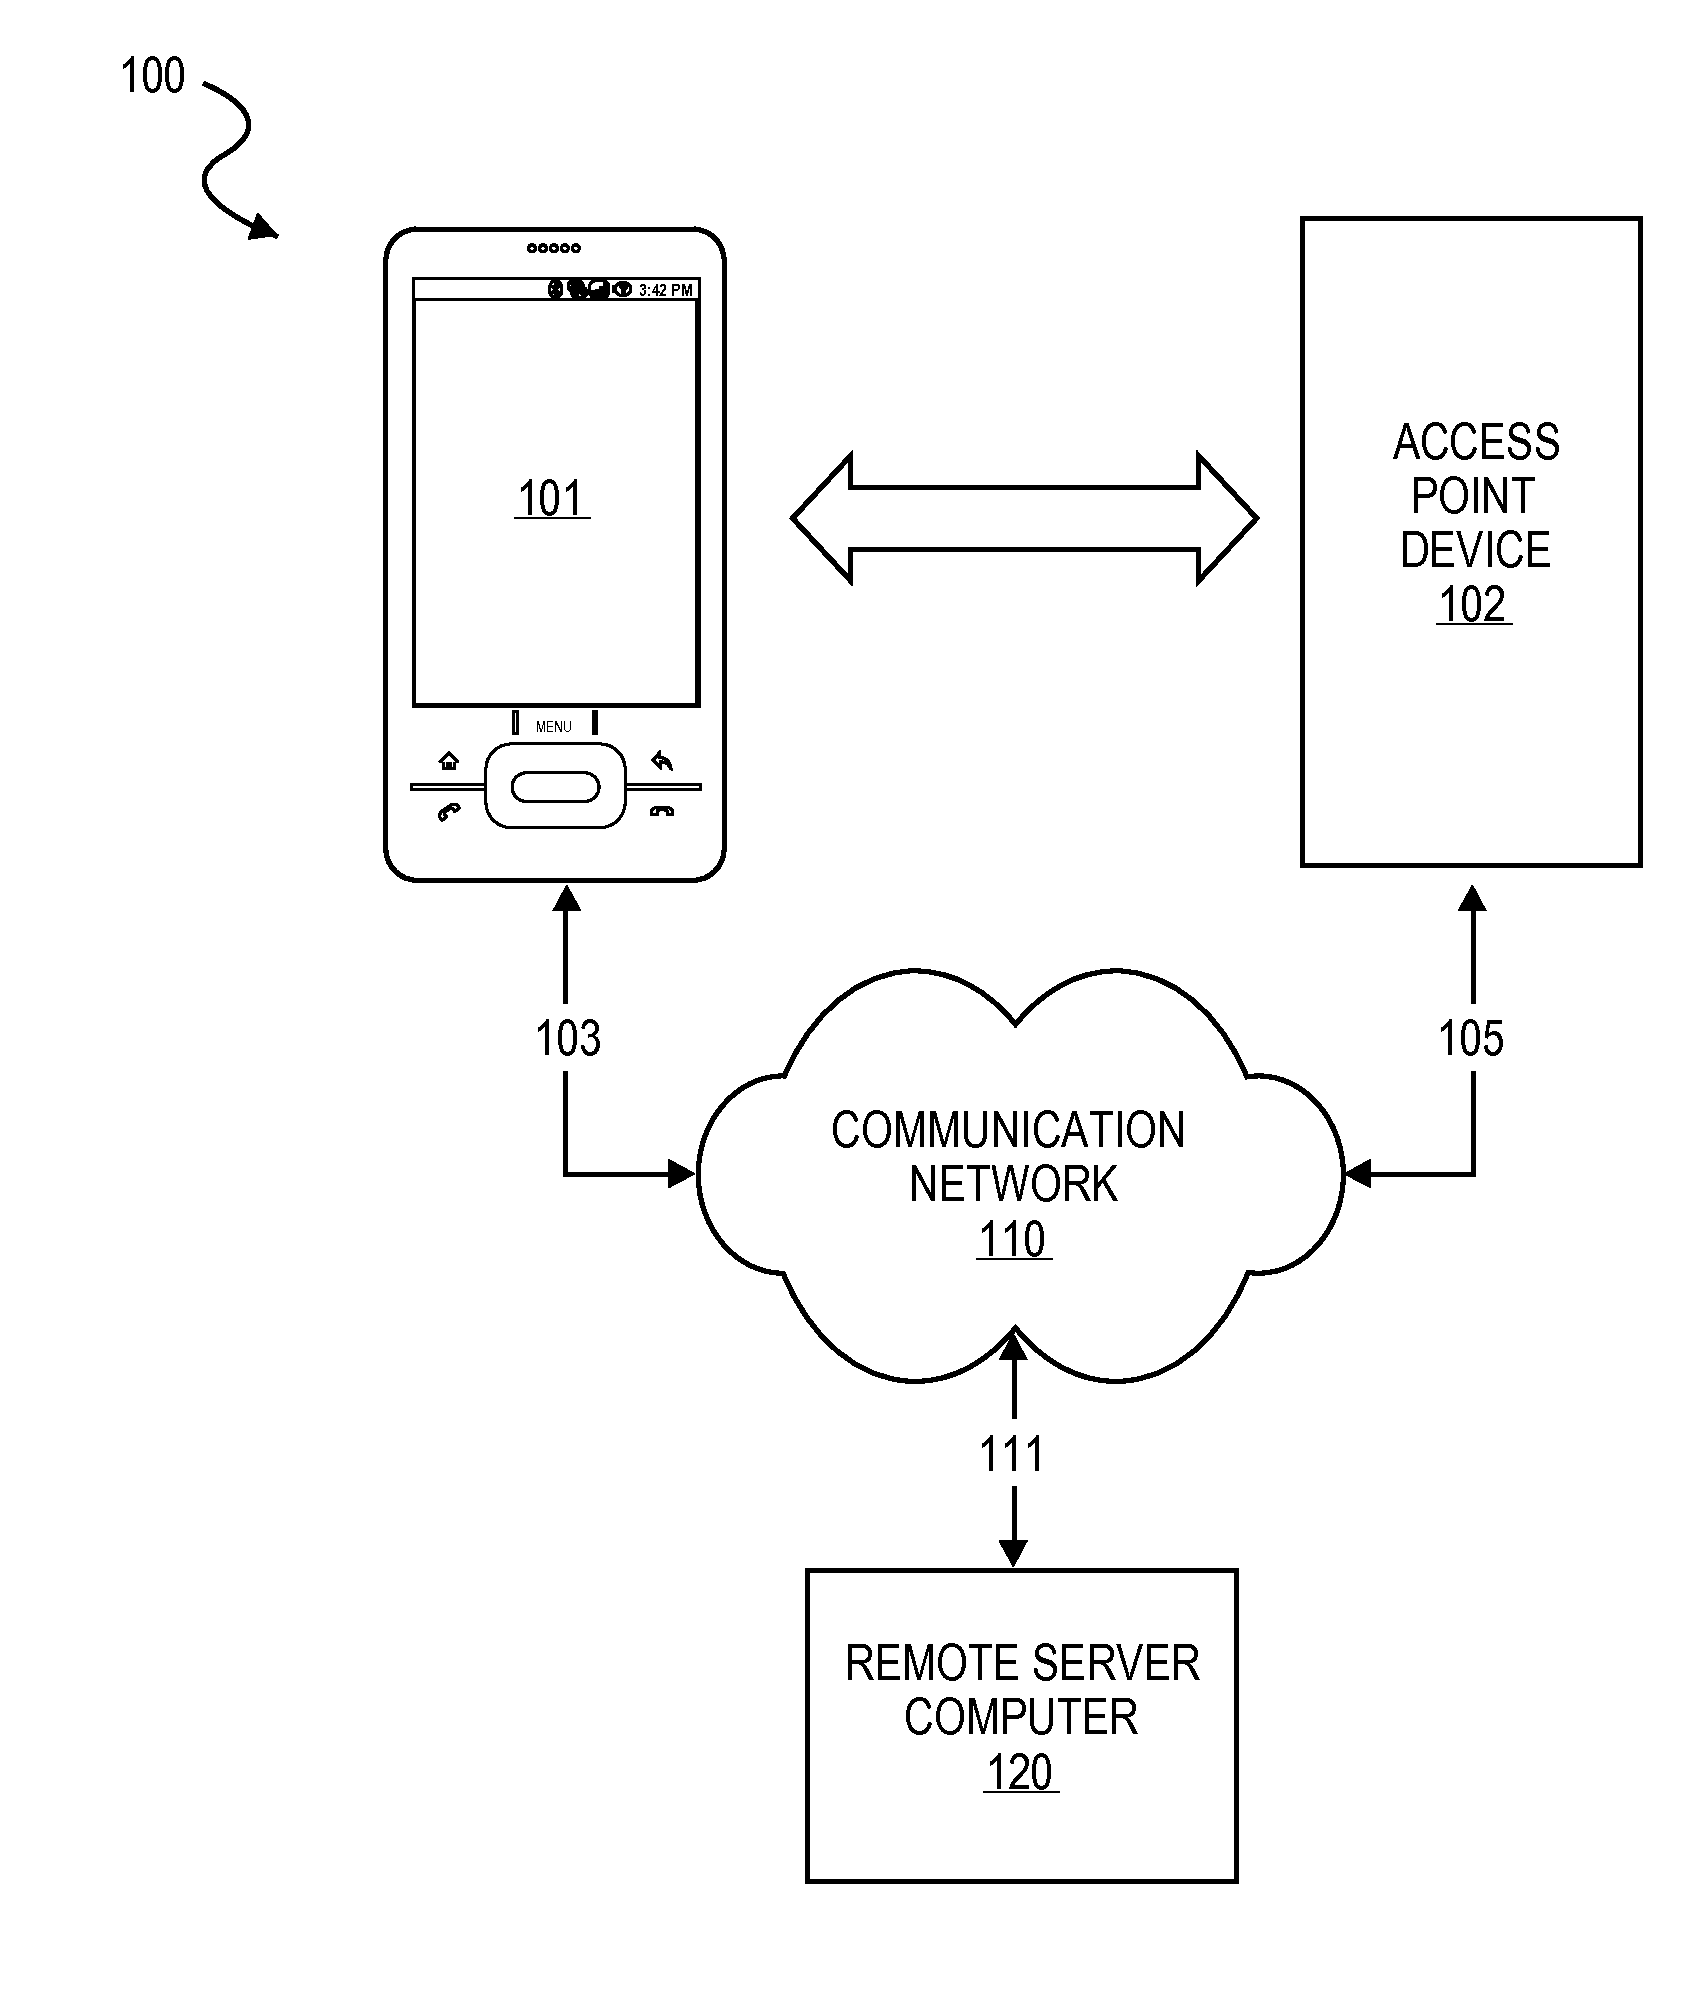 Access Using a Mobile Device with an Accelerometer